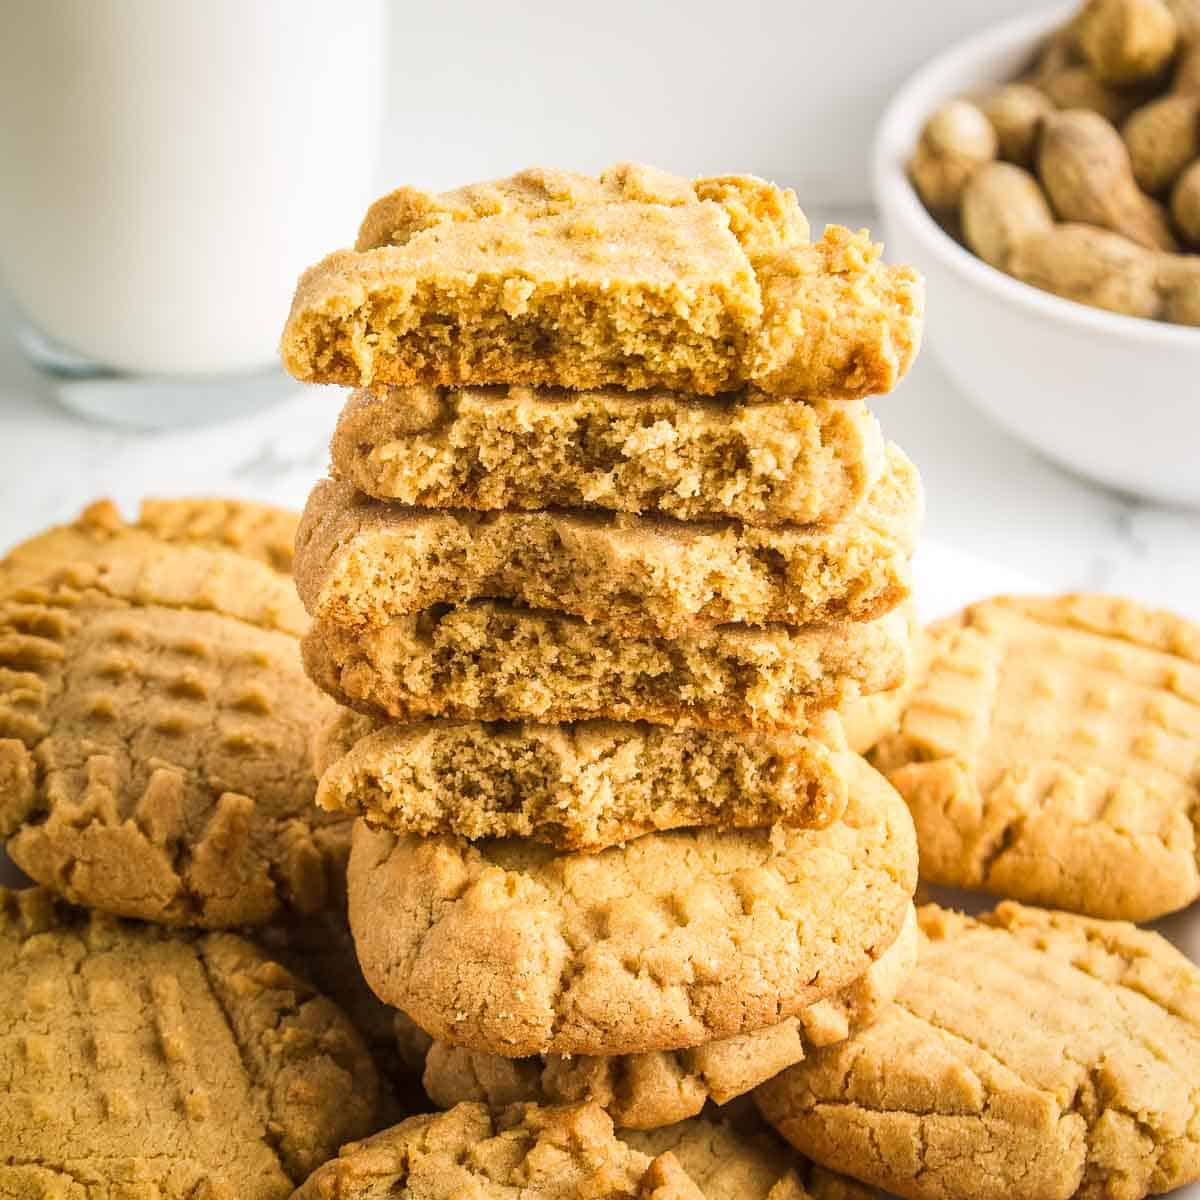 Side shot of multiple halved peanut butter cookies stacked on each other on a white marble surface with a glass of milk and a white bowl with whole peanuts in the background.